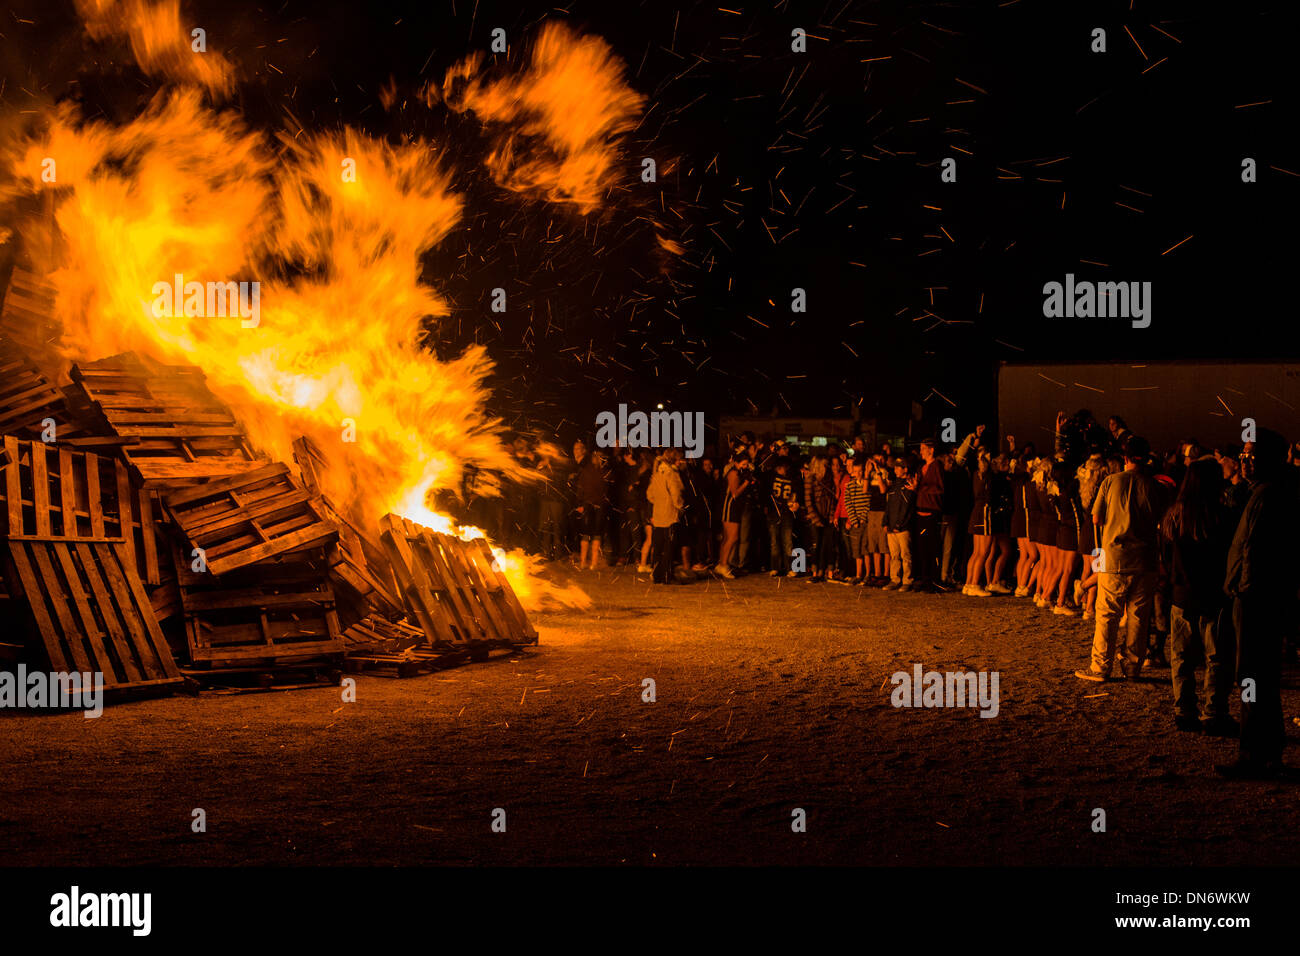 High school students gather for annual autumn pep rally and bonfire Stock Photo